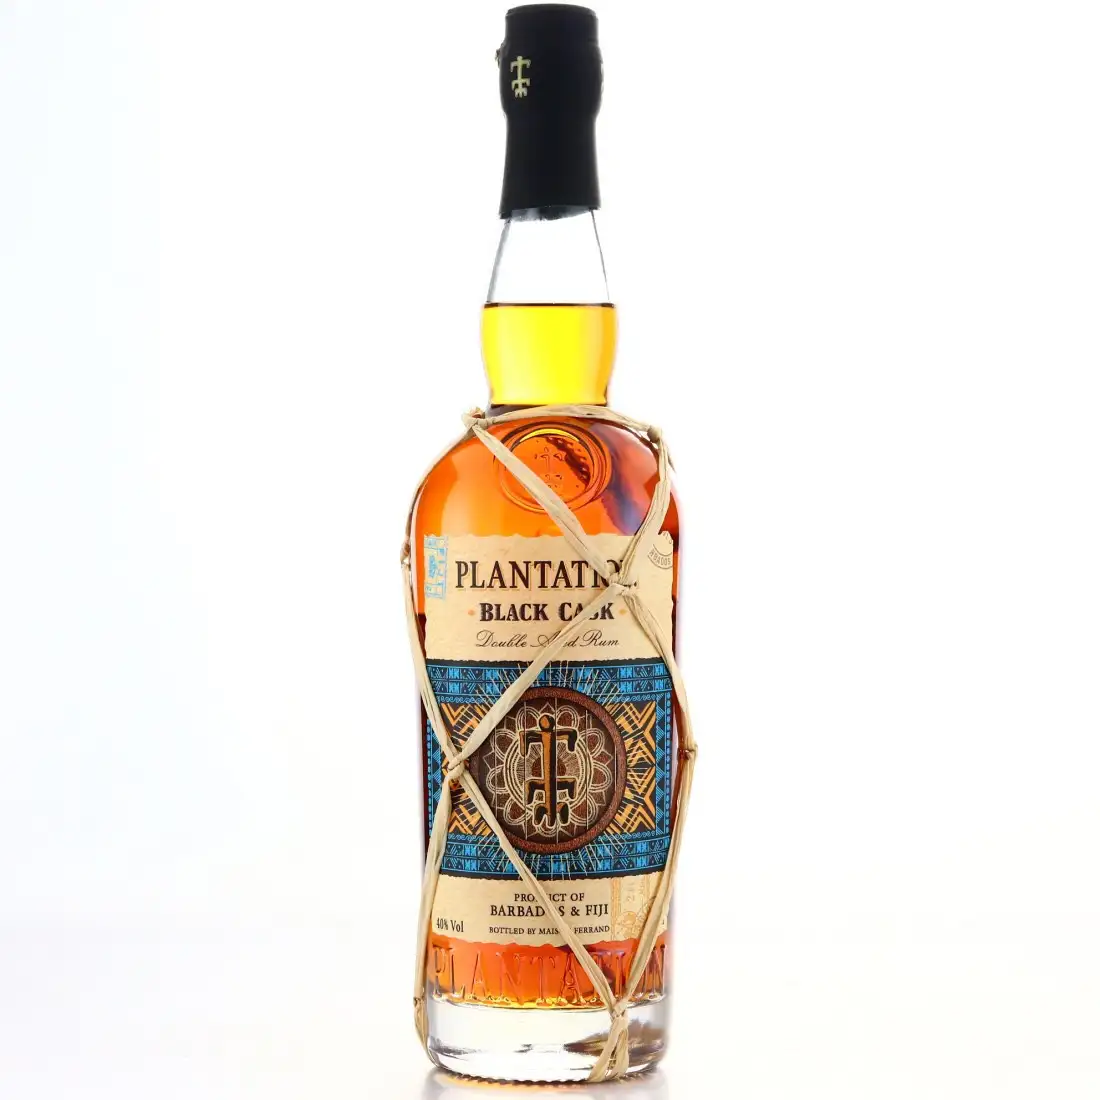 Image of the front of the bottle of the rum Plantation Black Cask Barbados & Fiji